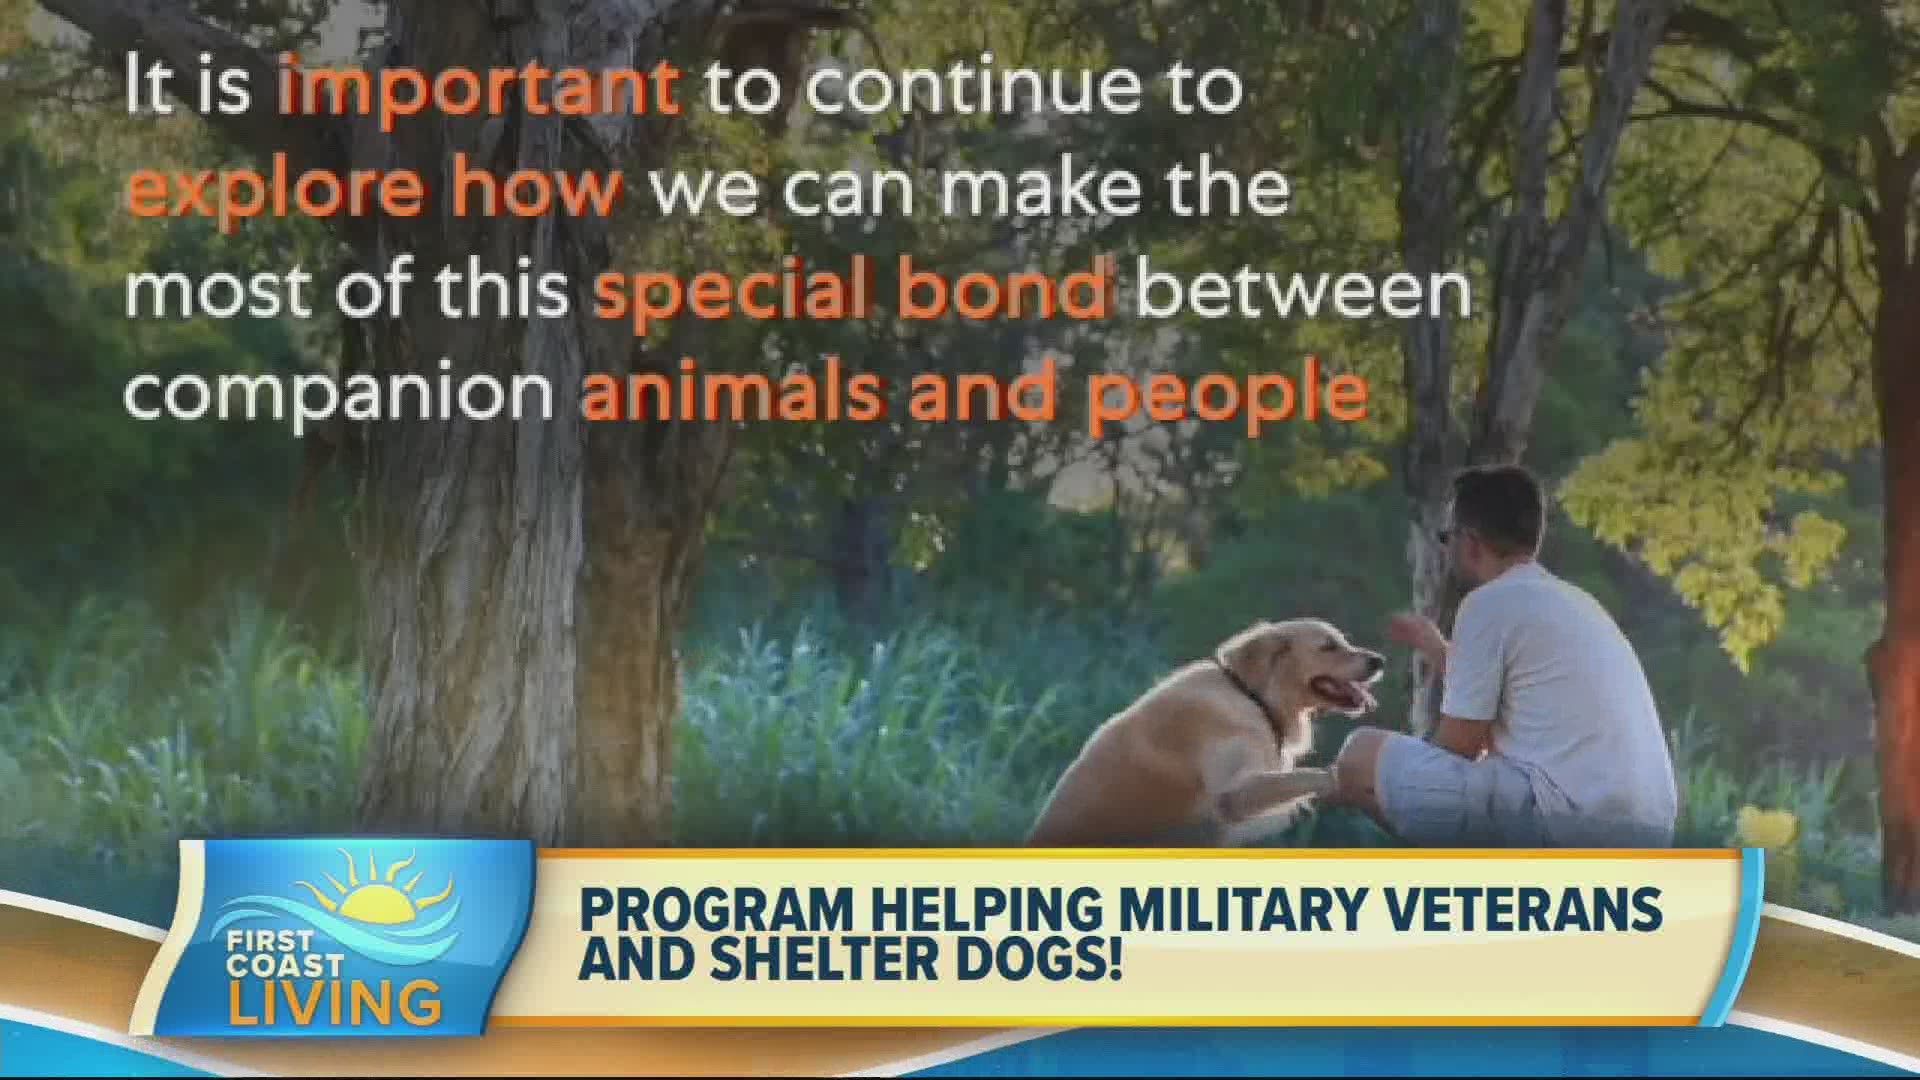 Learn more about an initiative designed to help our pets and veterans!